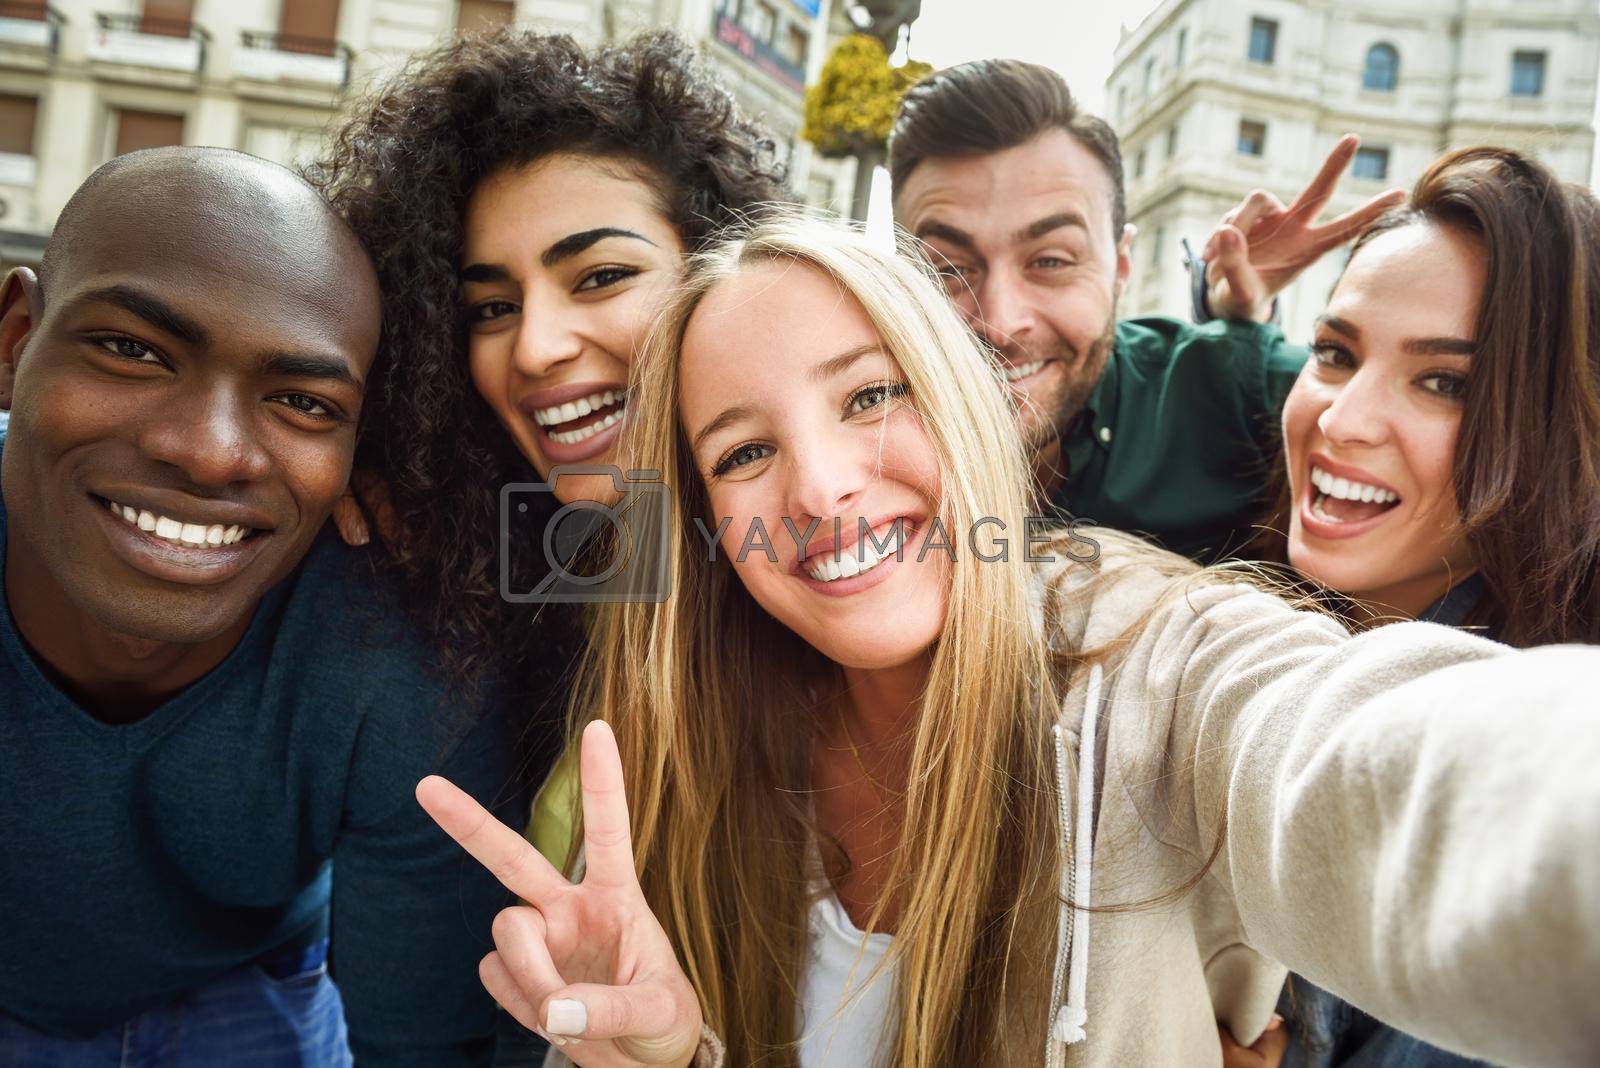 Royalty free image of Multiracial group of young people taking selfie by javiindy